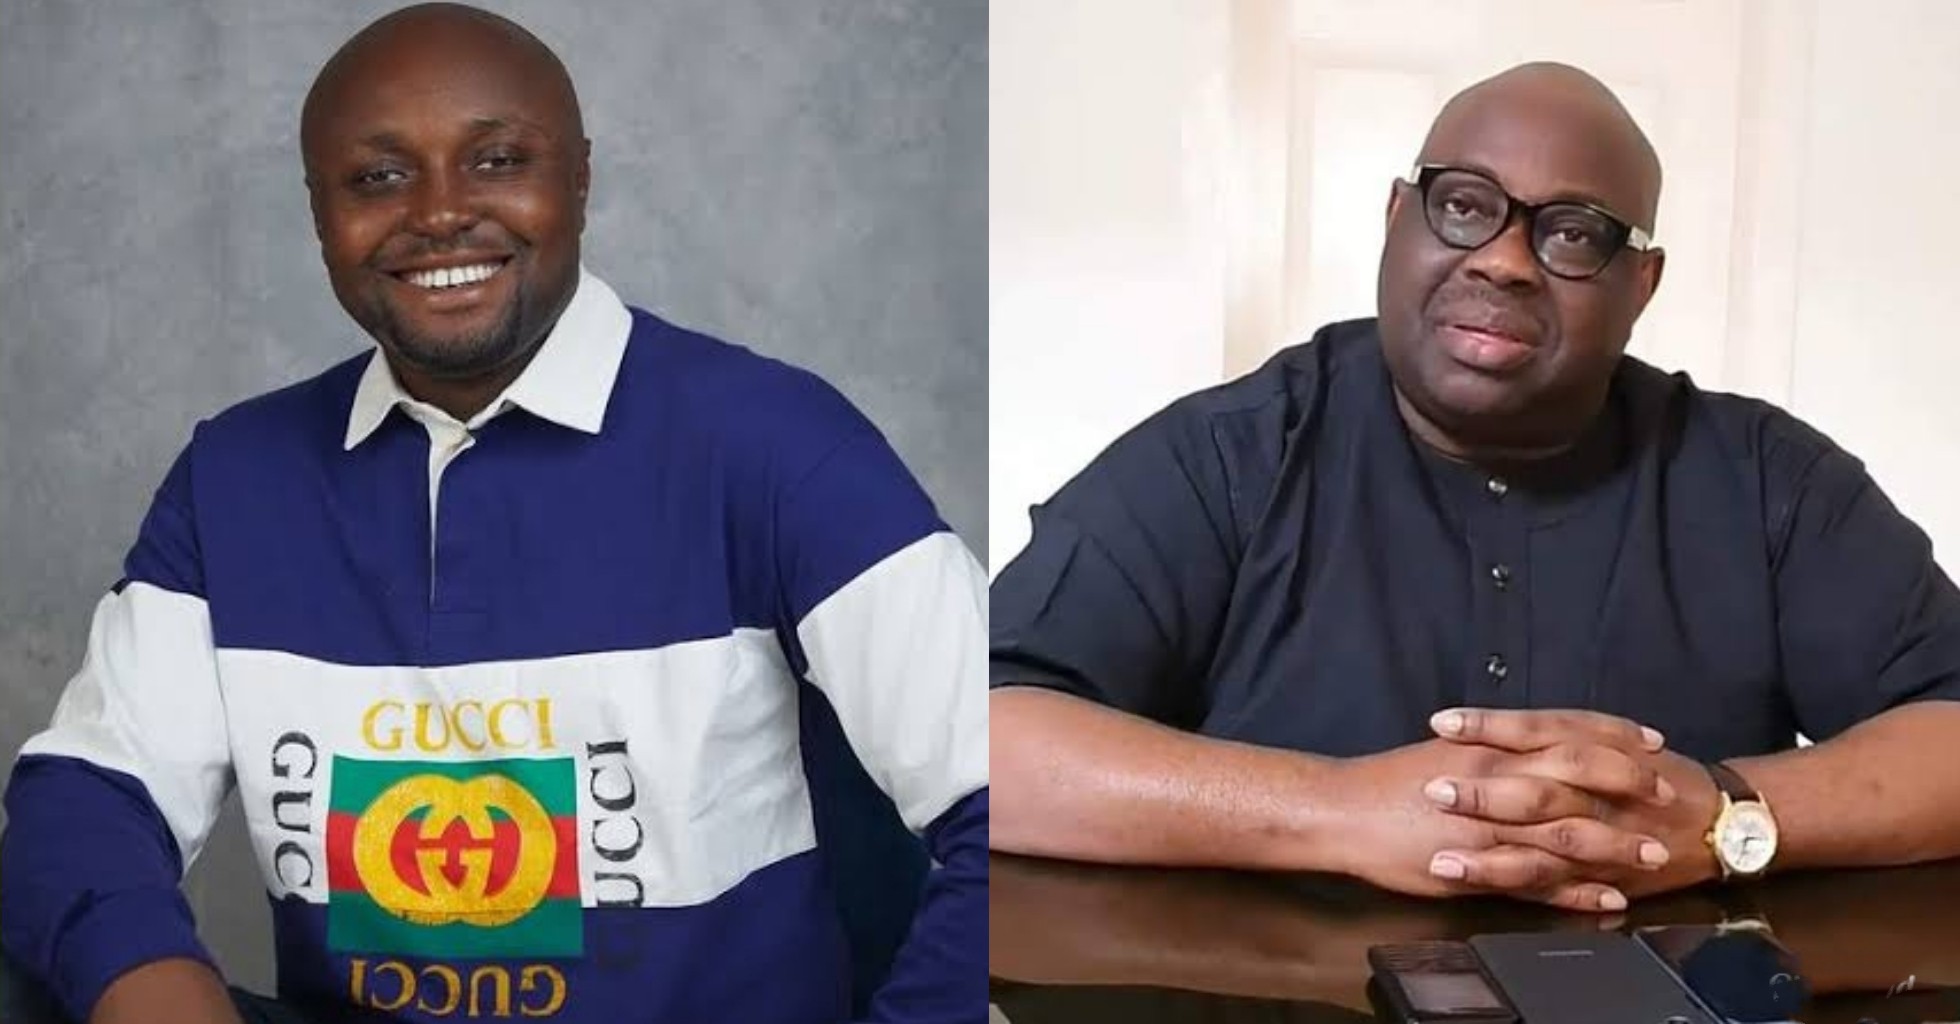 How Dele Momodu accused me of stealing - Davido's PA, Israel DMW reveals [VIDEO]